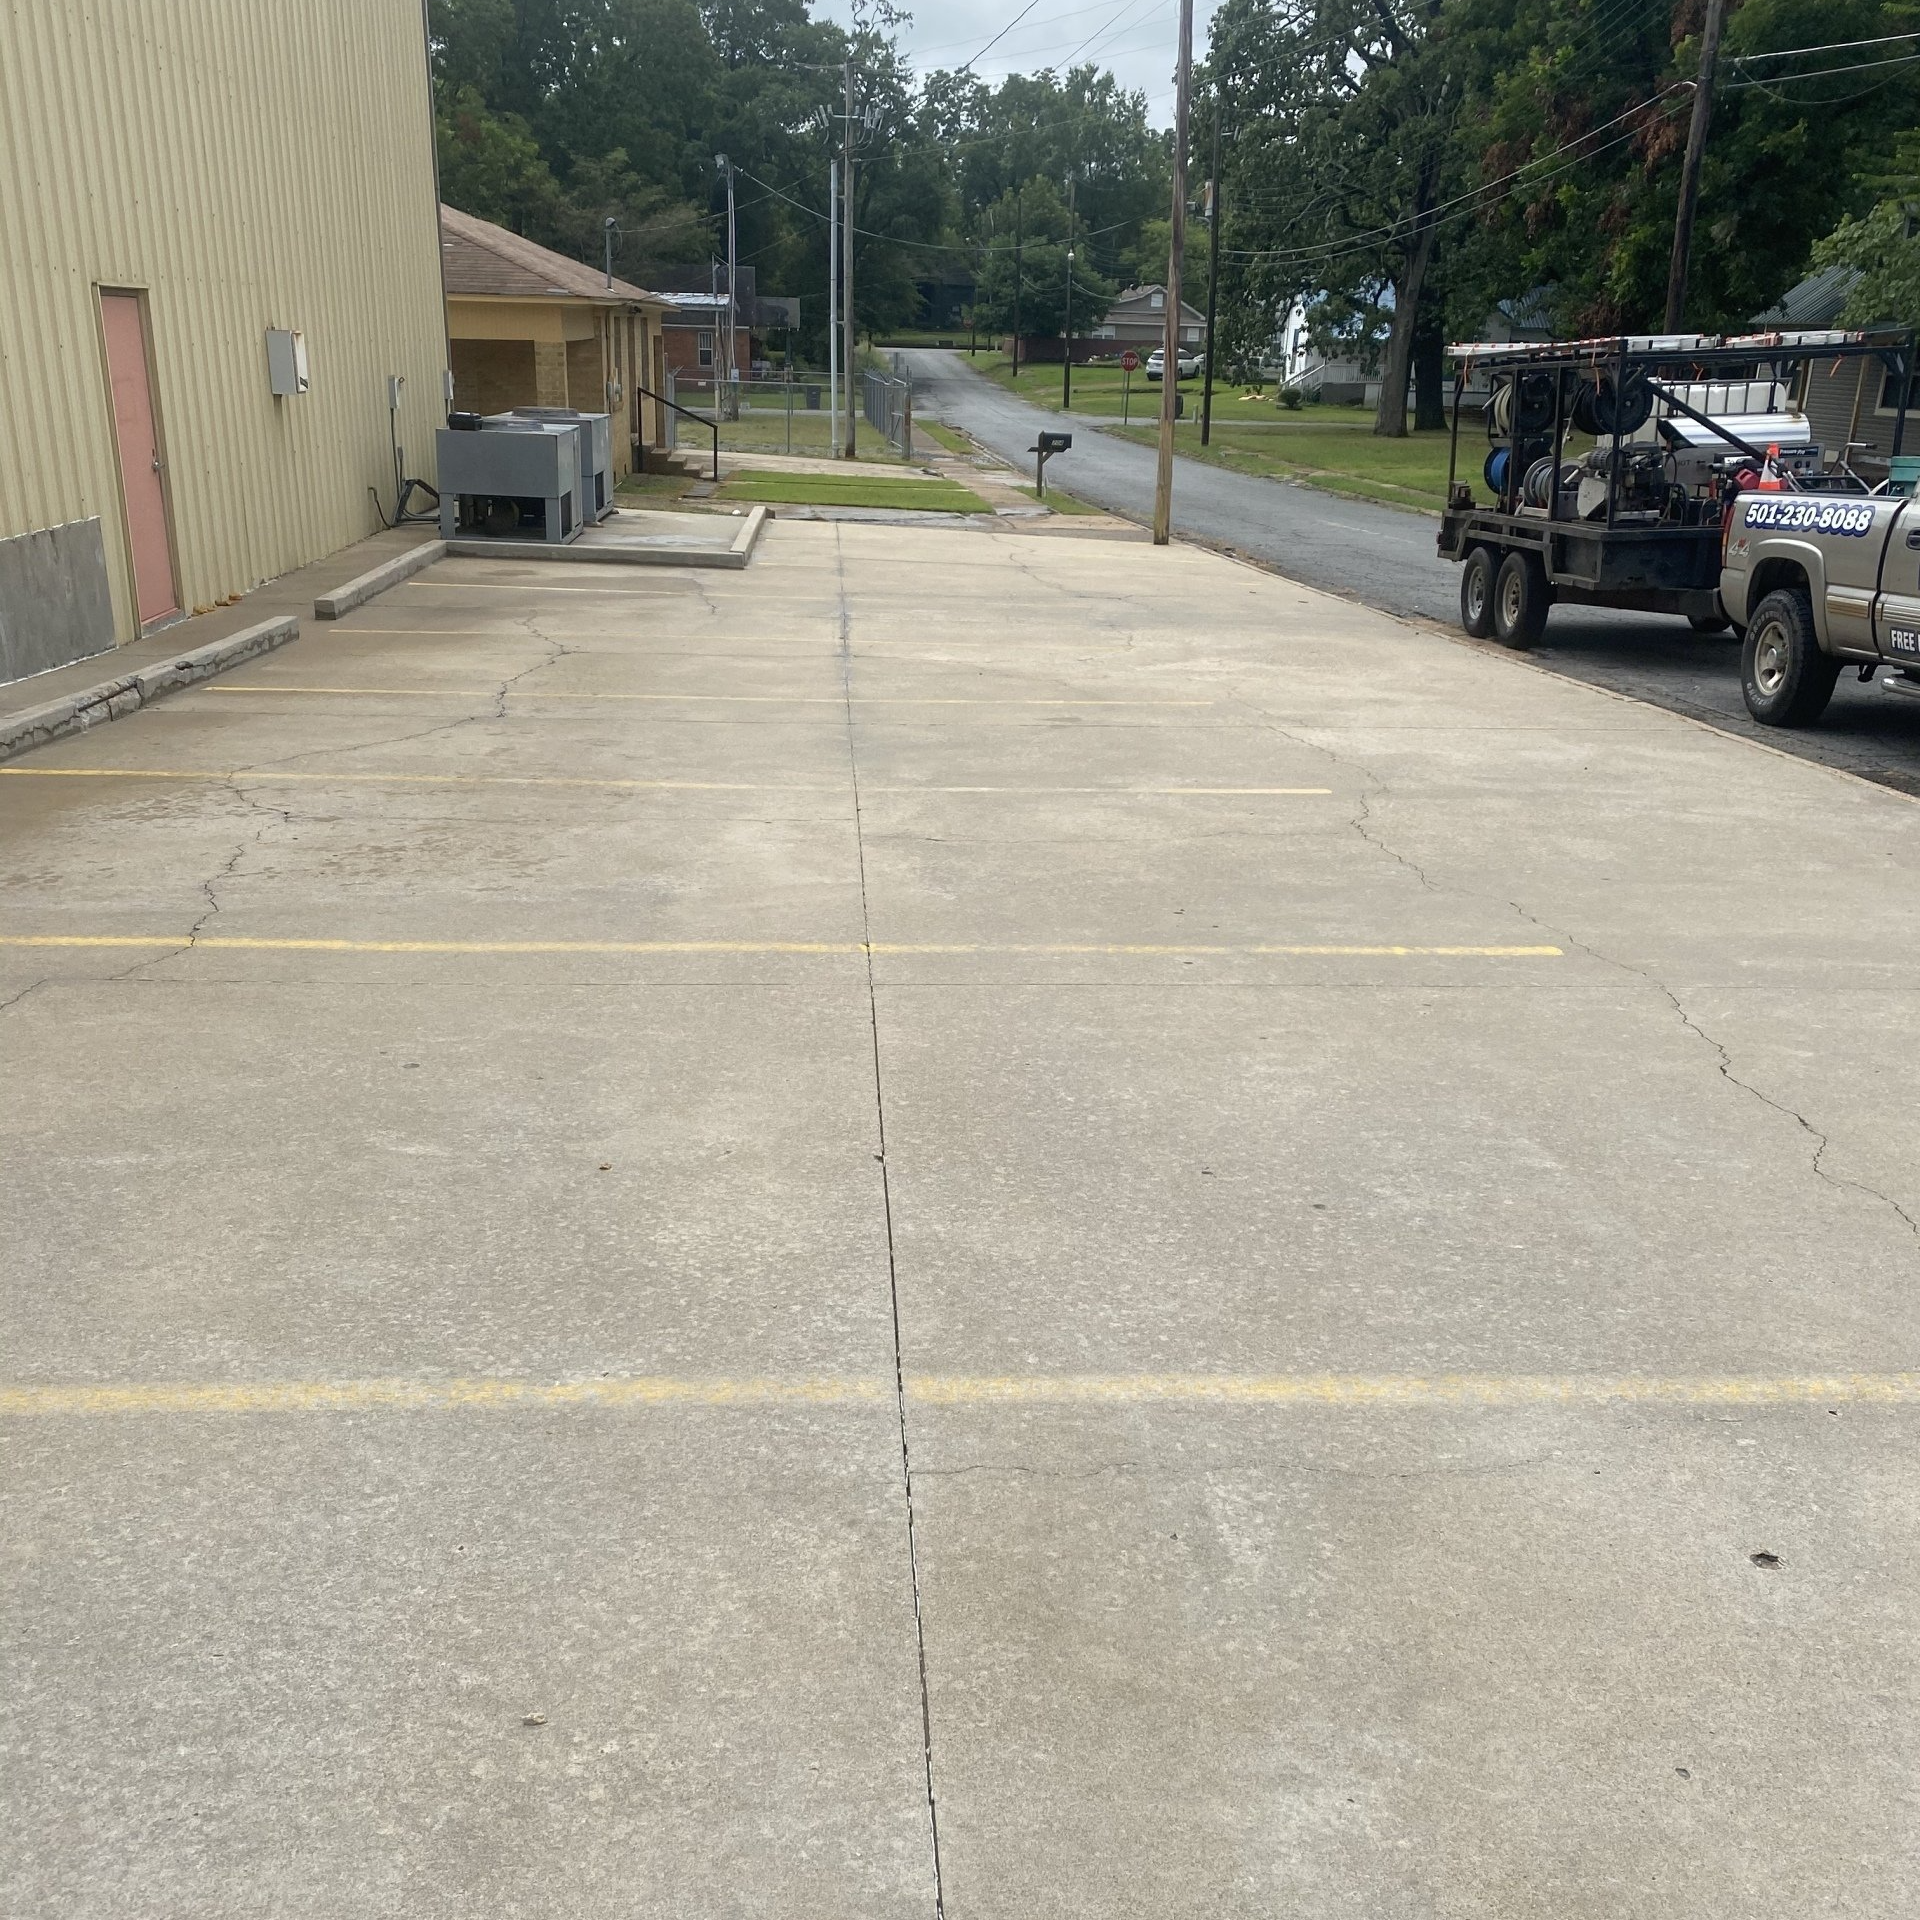 Pressure washed parking lot of commercial business in Arkansas